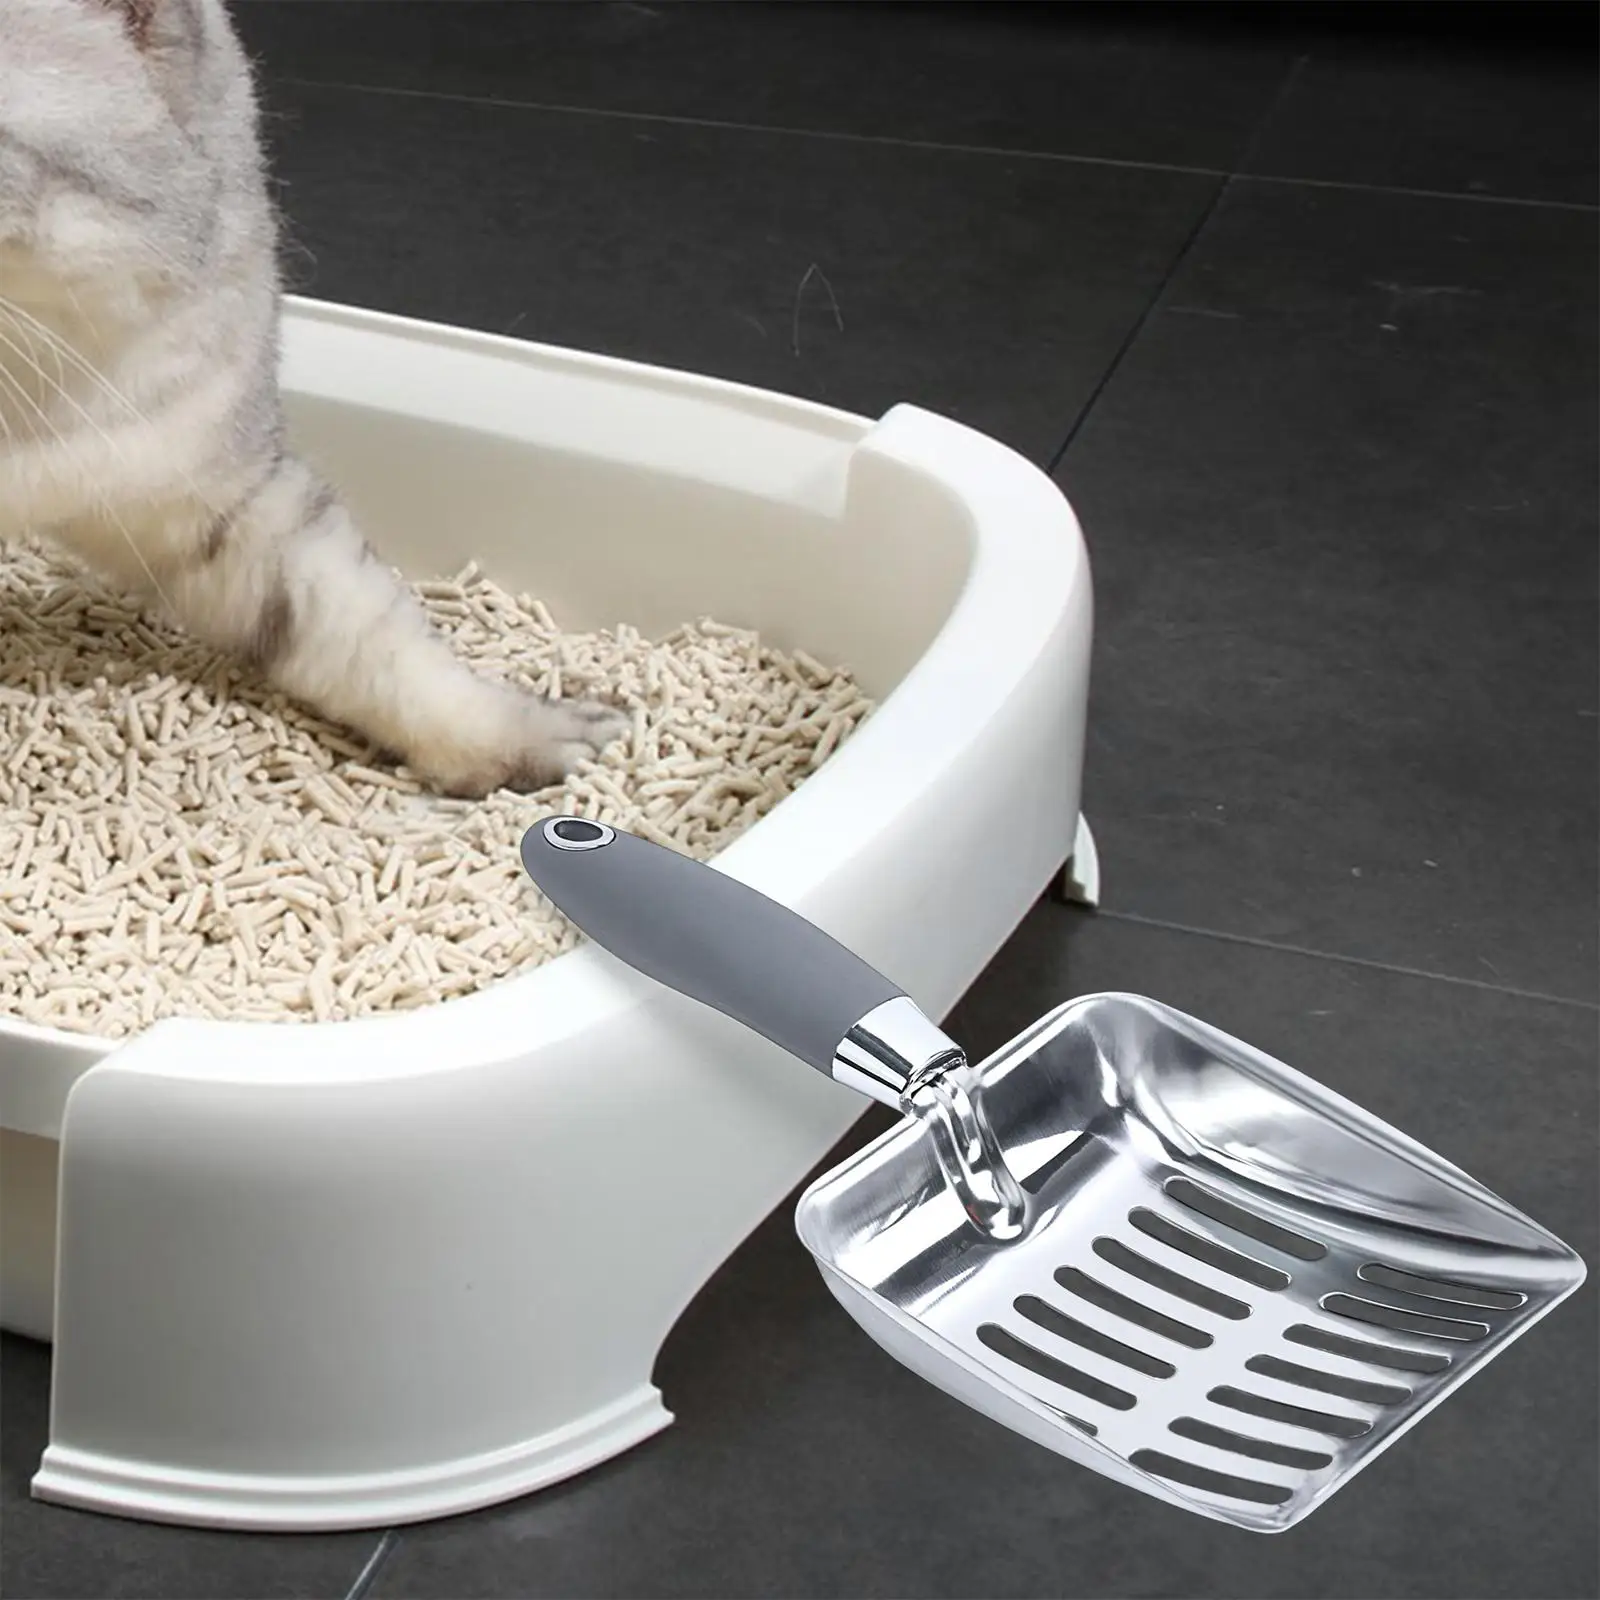 Cat Litter Sifting Mesh Screen Fecal Spoon Sifter Petser for Puppy